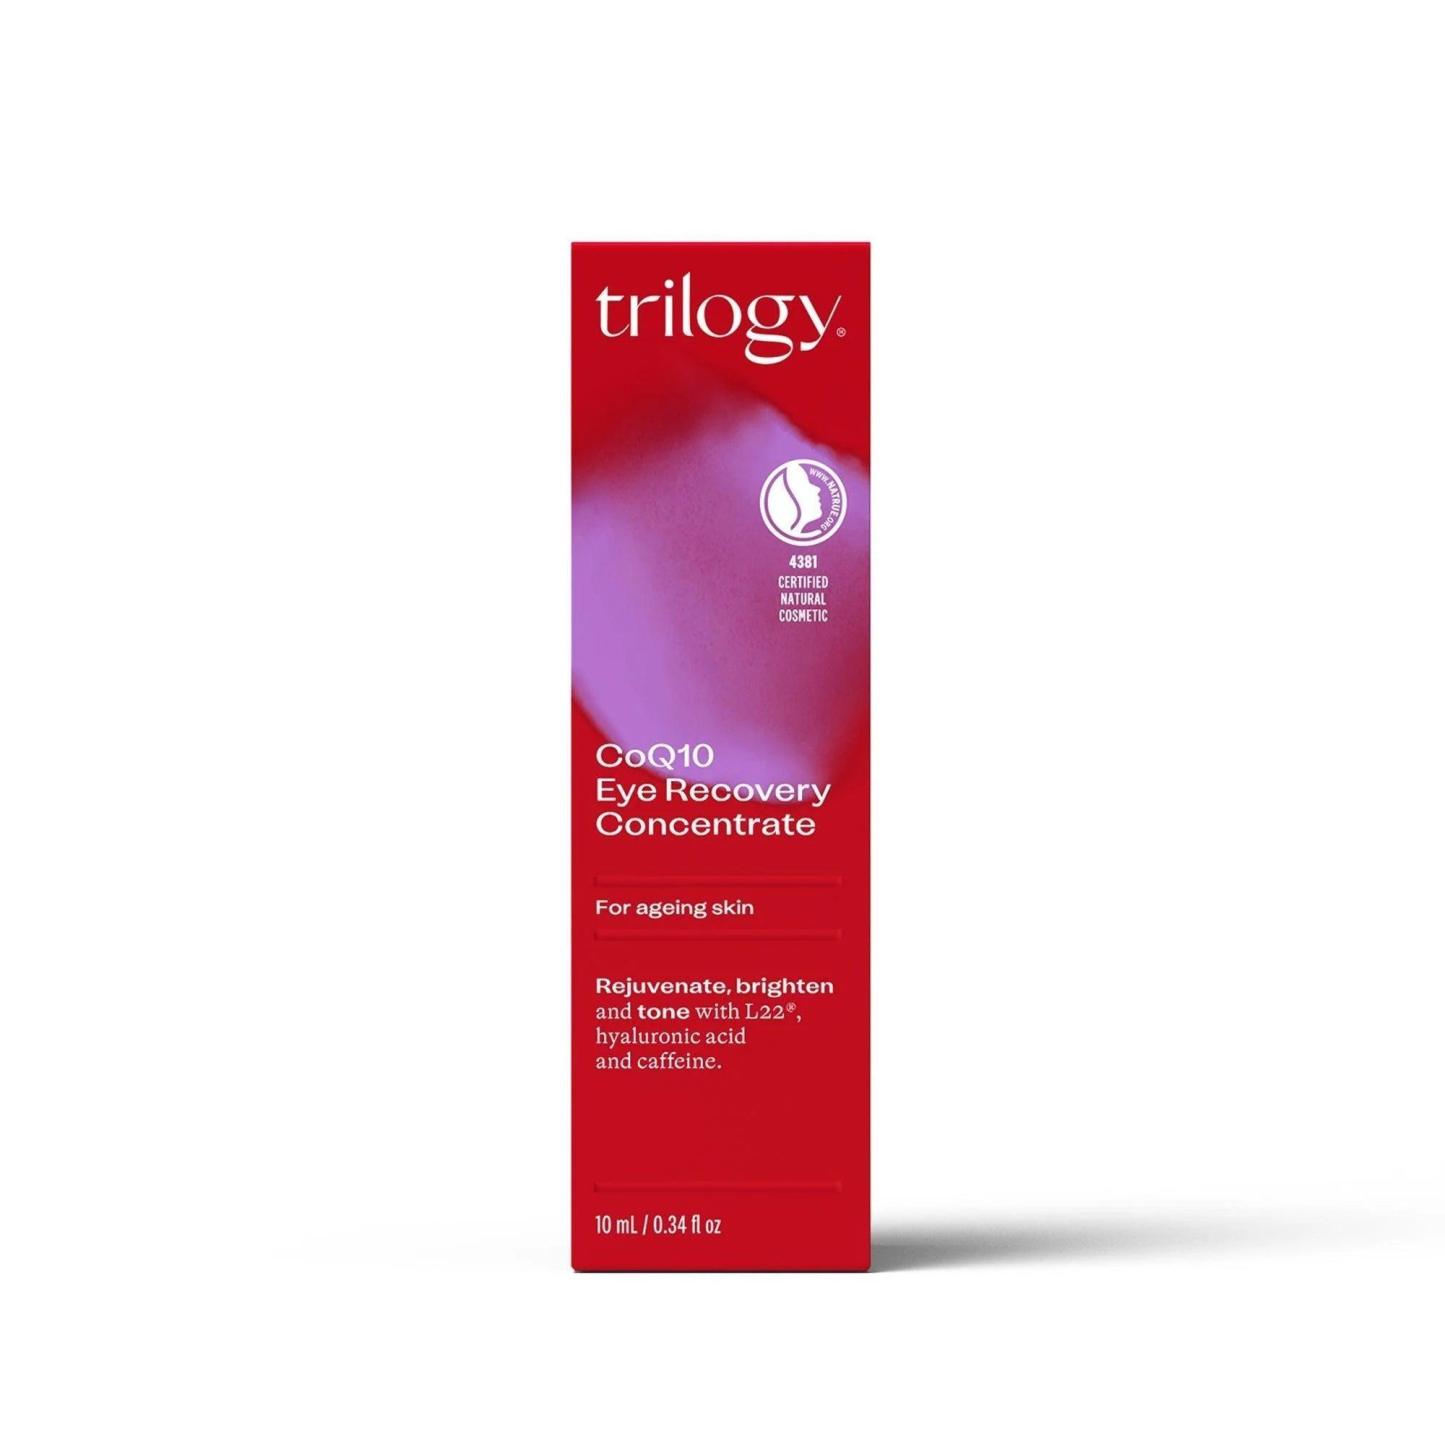 Trilogy Ageless CoQ10 Eye Recovery Concentration 10ml by Love Nature